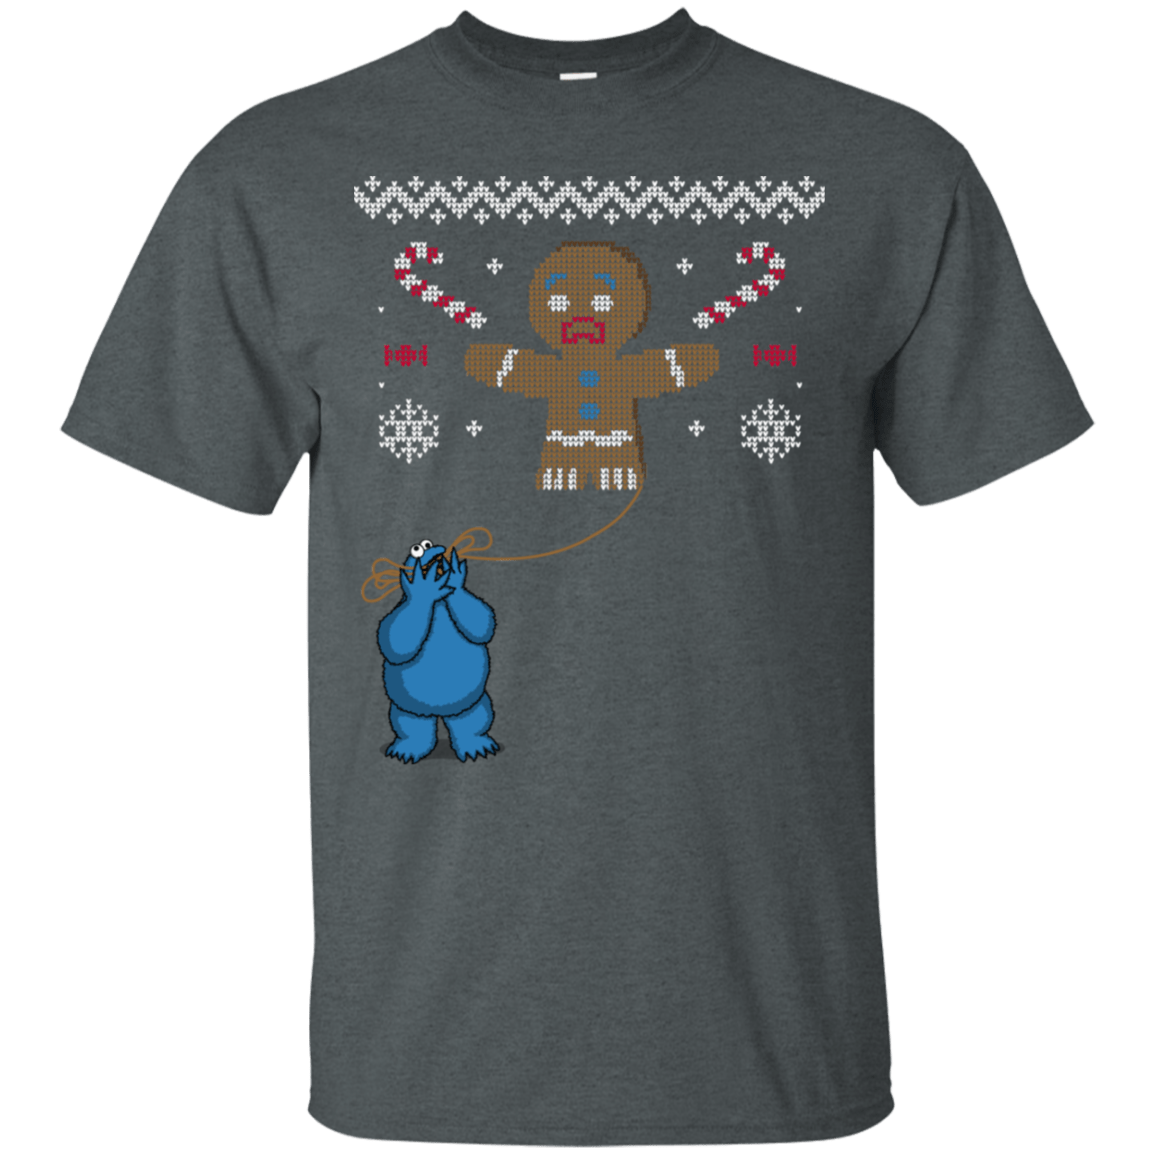 T-Shirts Dark Heather / S Ugly Cookie T-Shirt